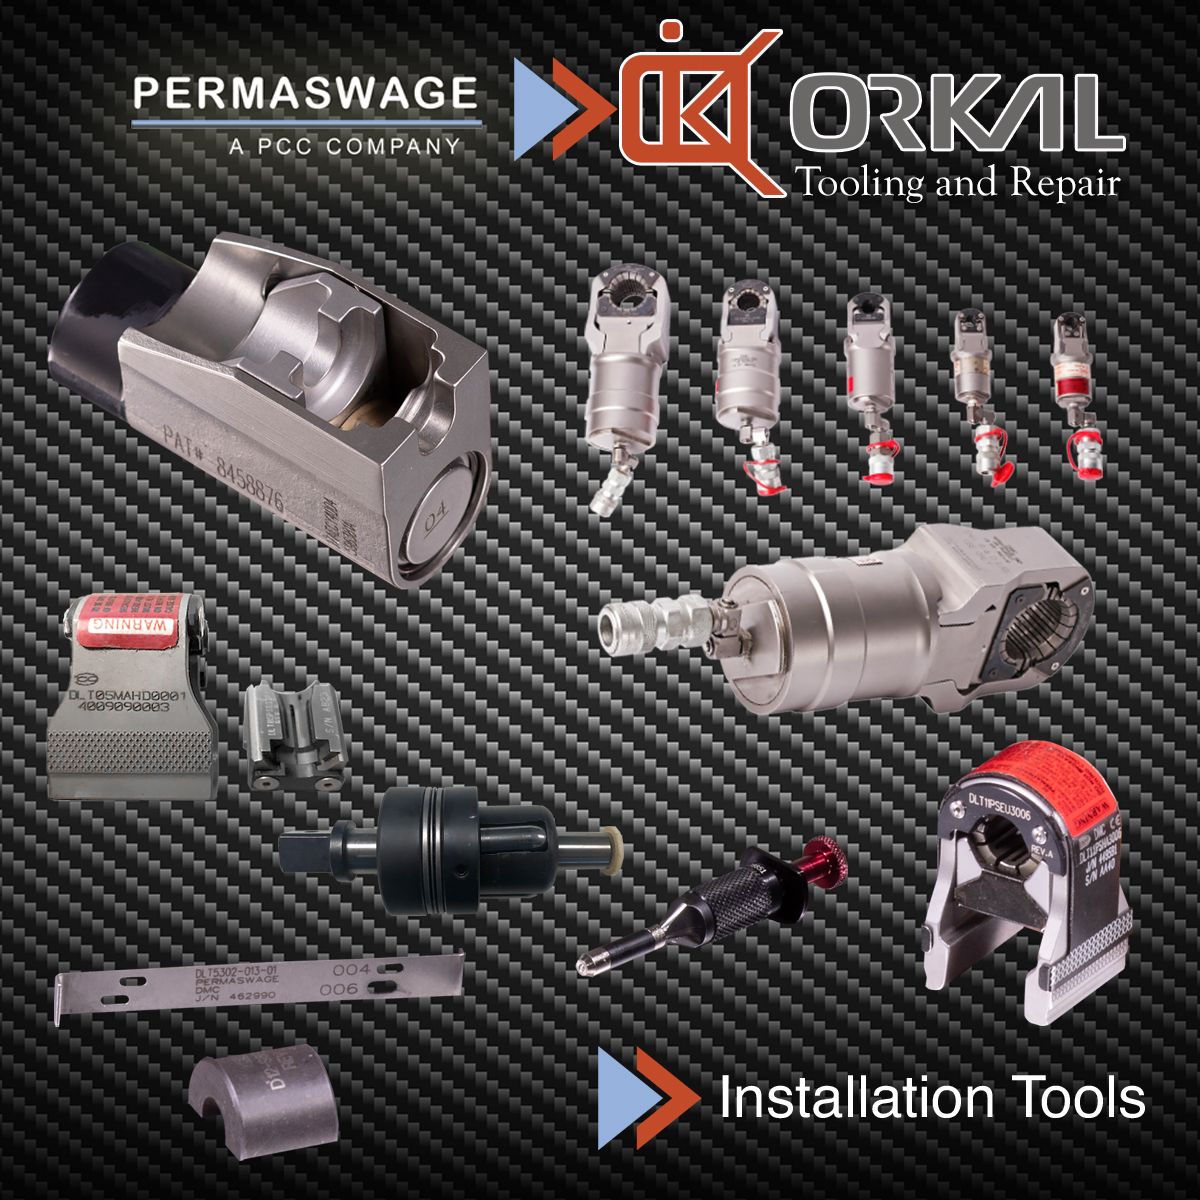 orkal, permaswage & orkal tools with fittings for aircraft fluid transfer systems on carbon fiber backdrop; compliance, repair, logistics support.